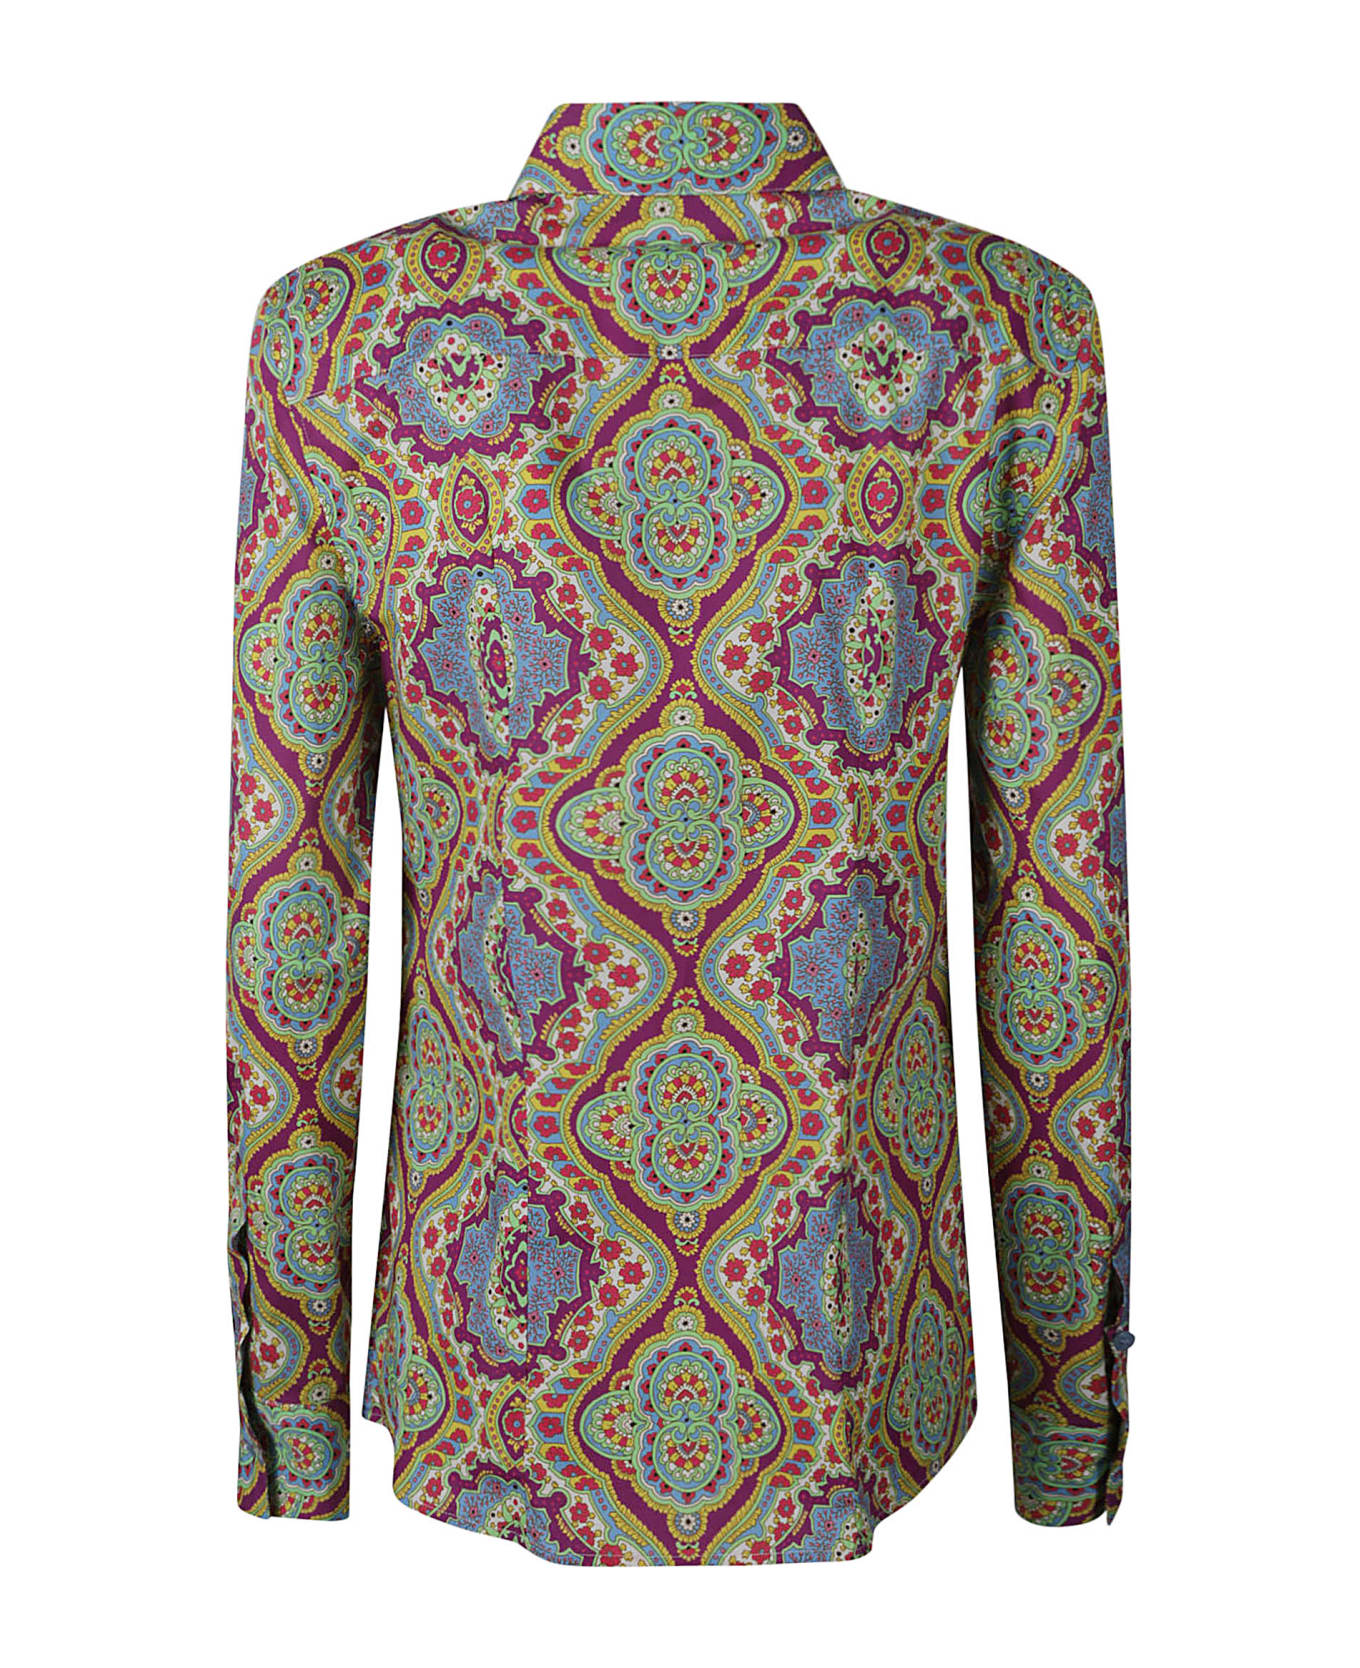 Etro Graphic Printed Buttoned Shirt - Multicolor